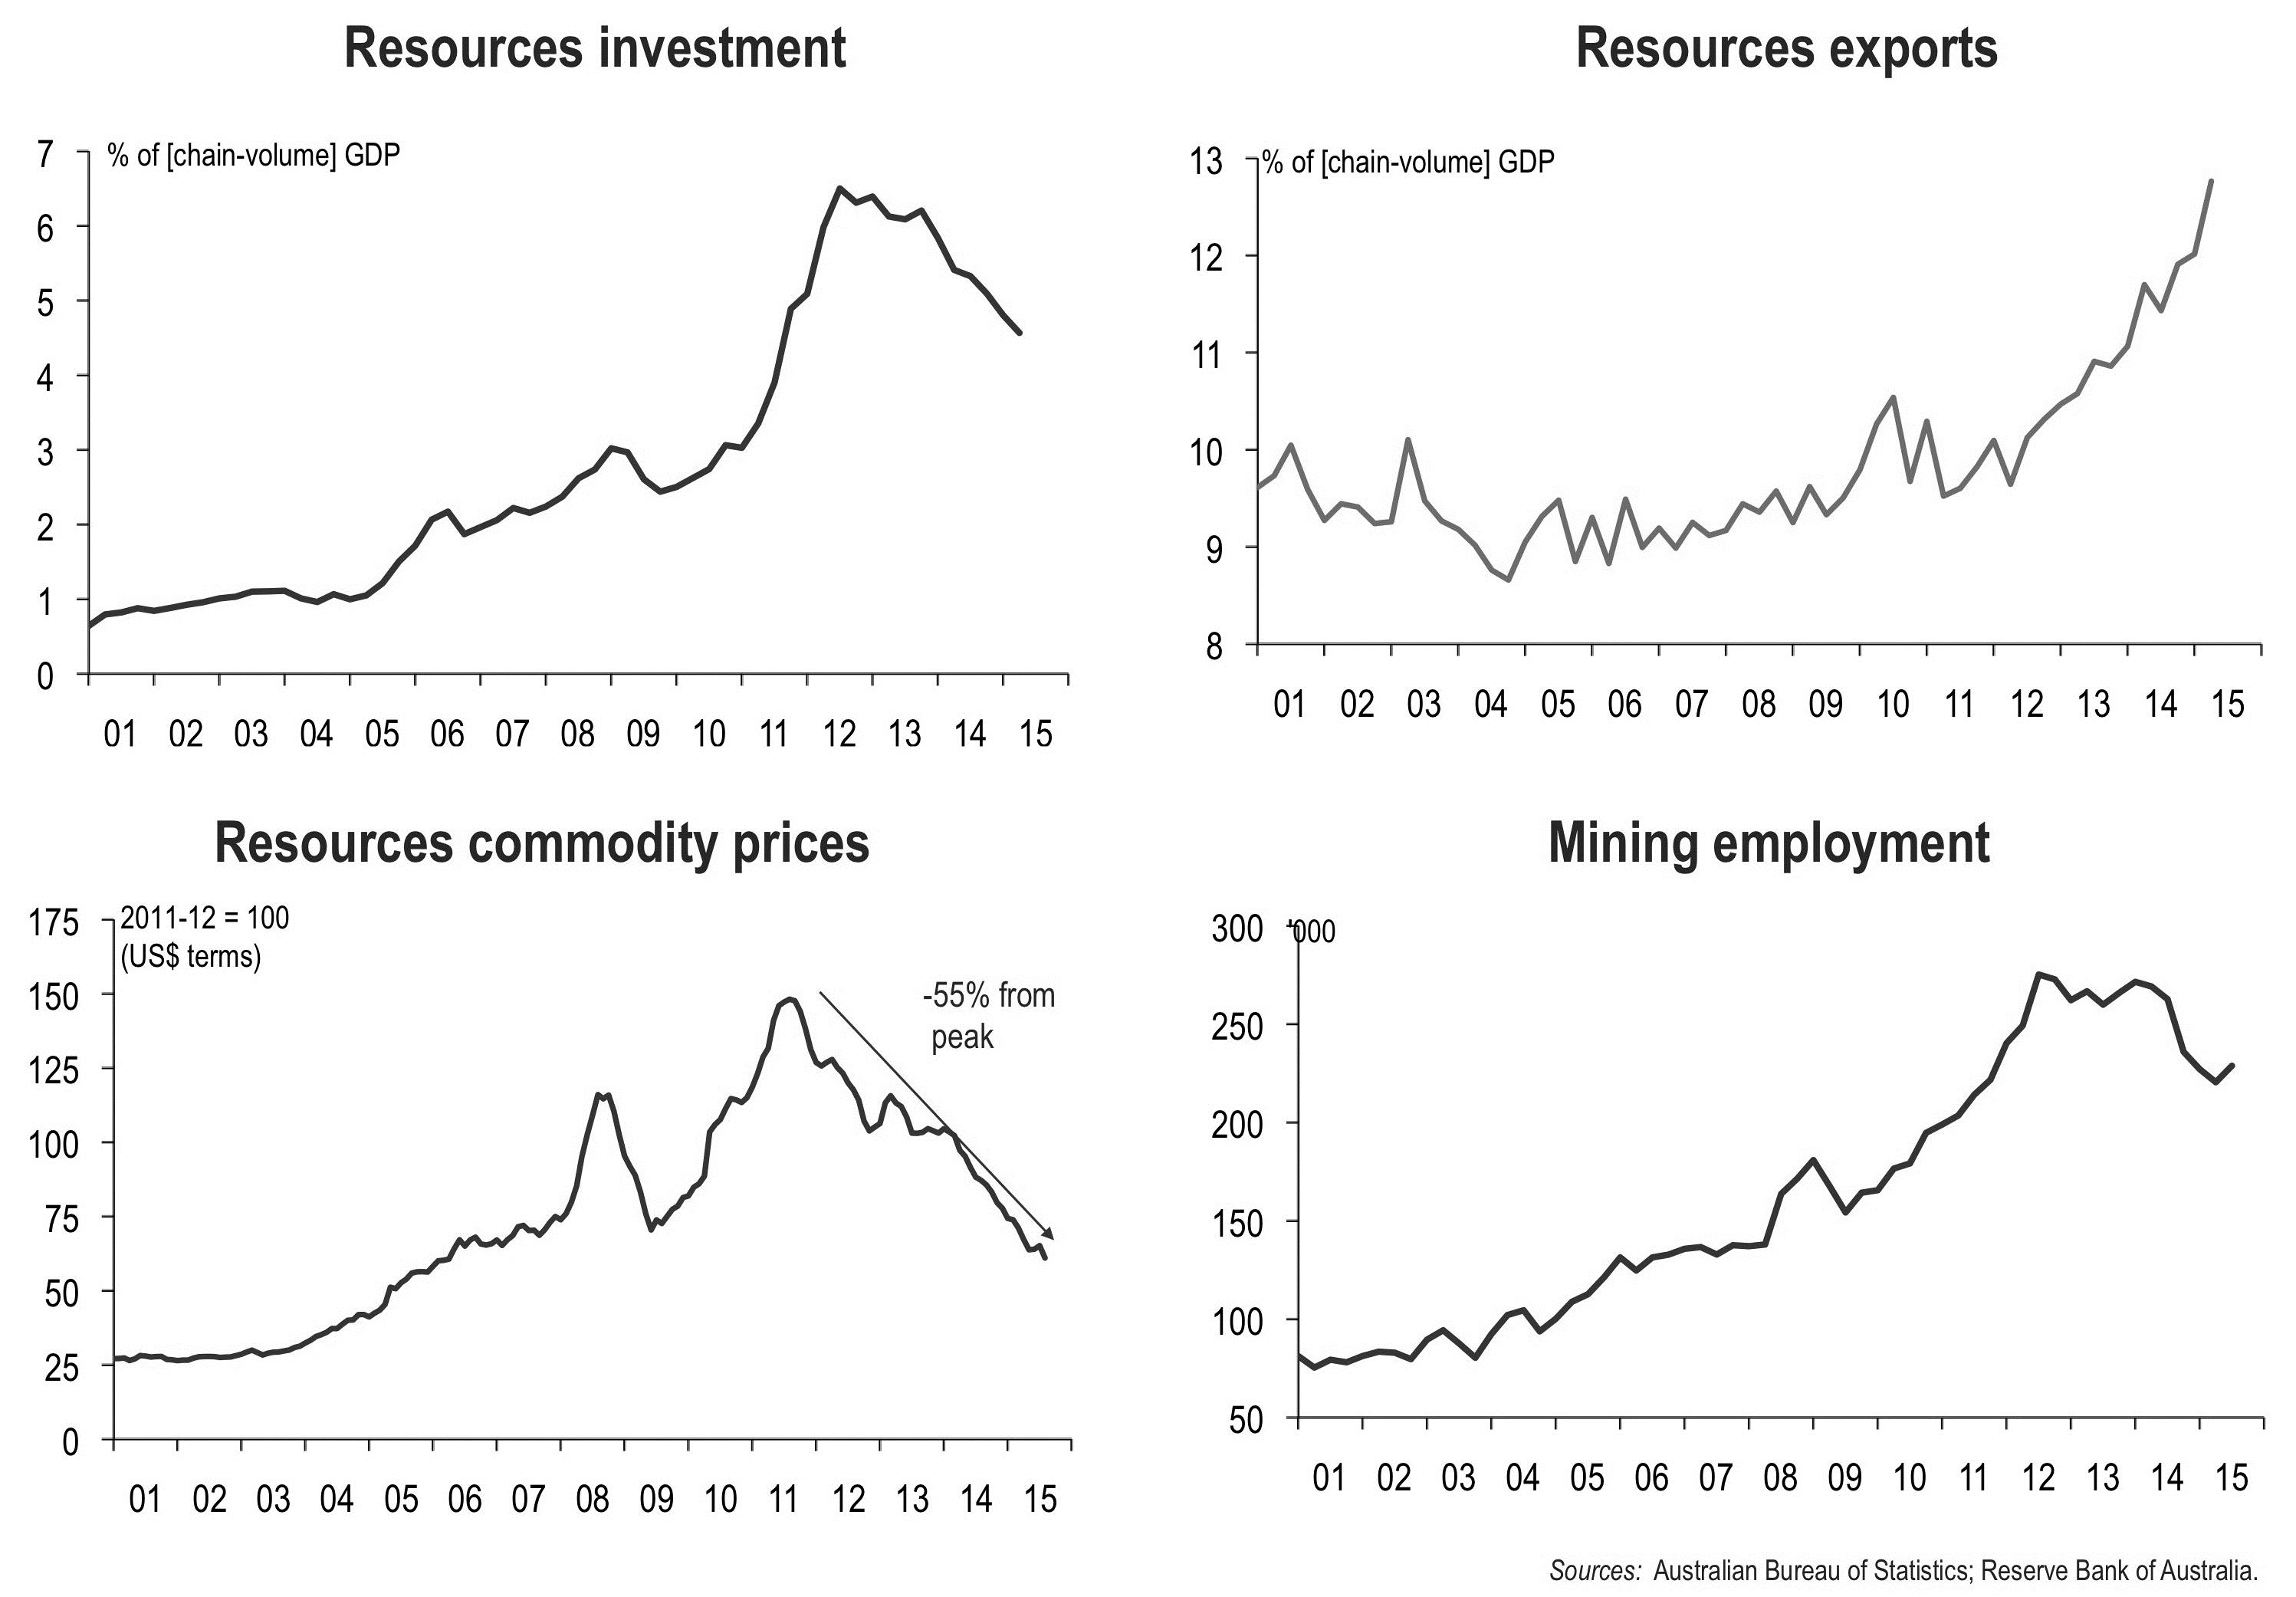 Figure 13: Indicators of Australia’s ‘resources investment’ and ‘mining employment’.